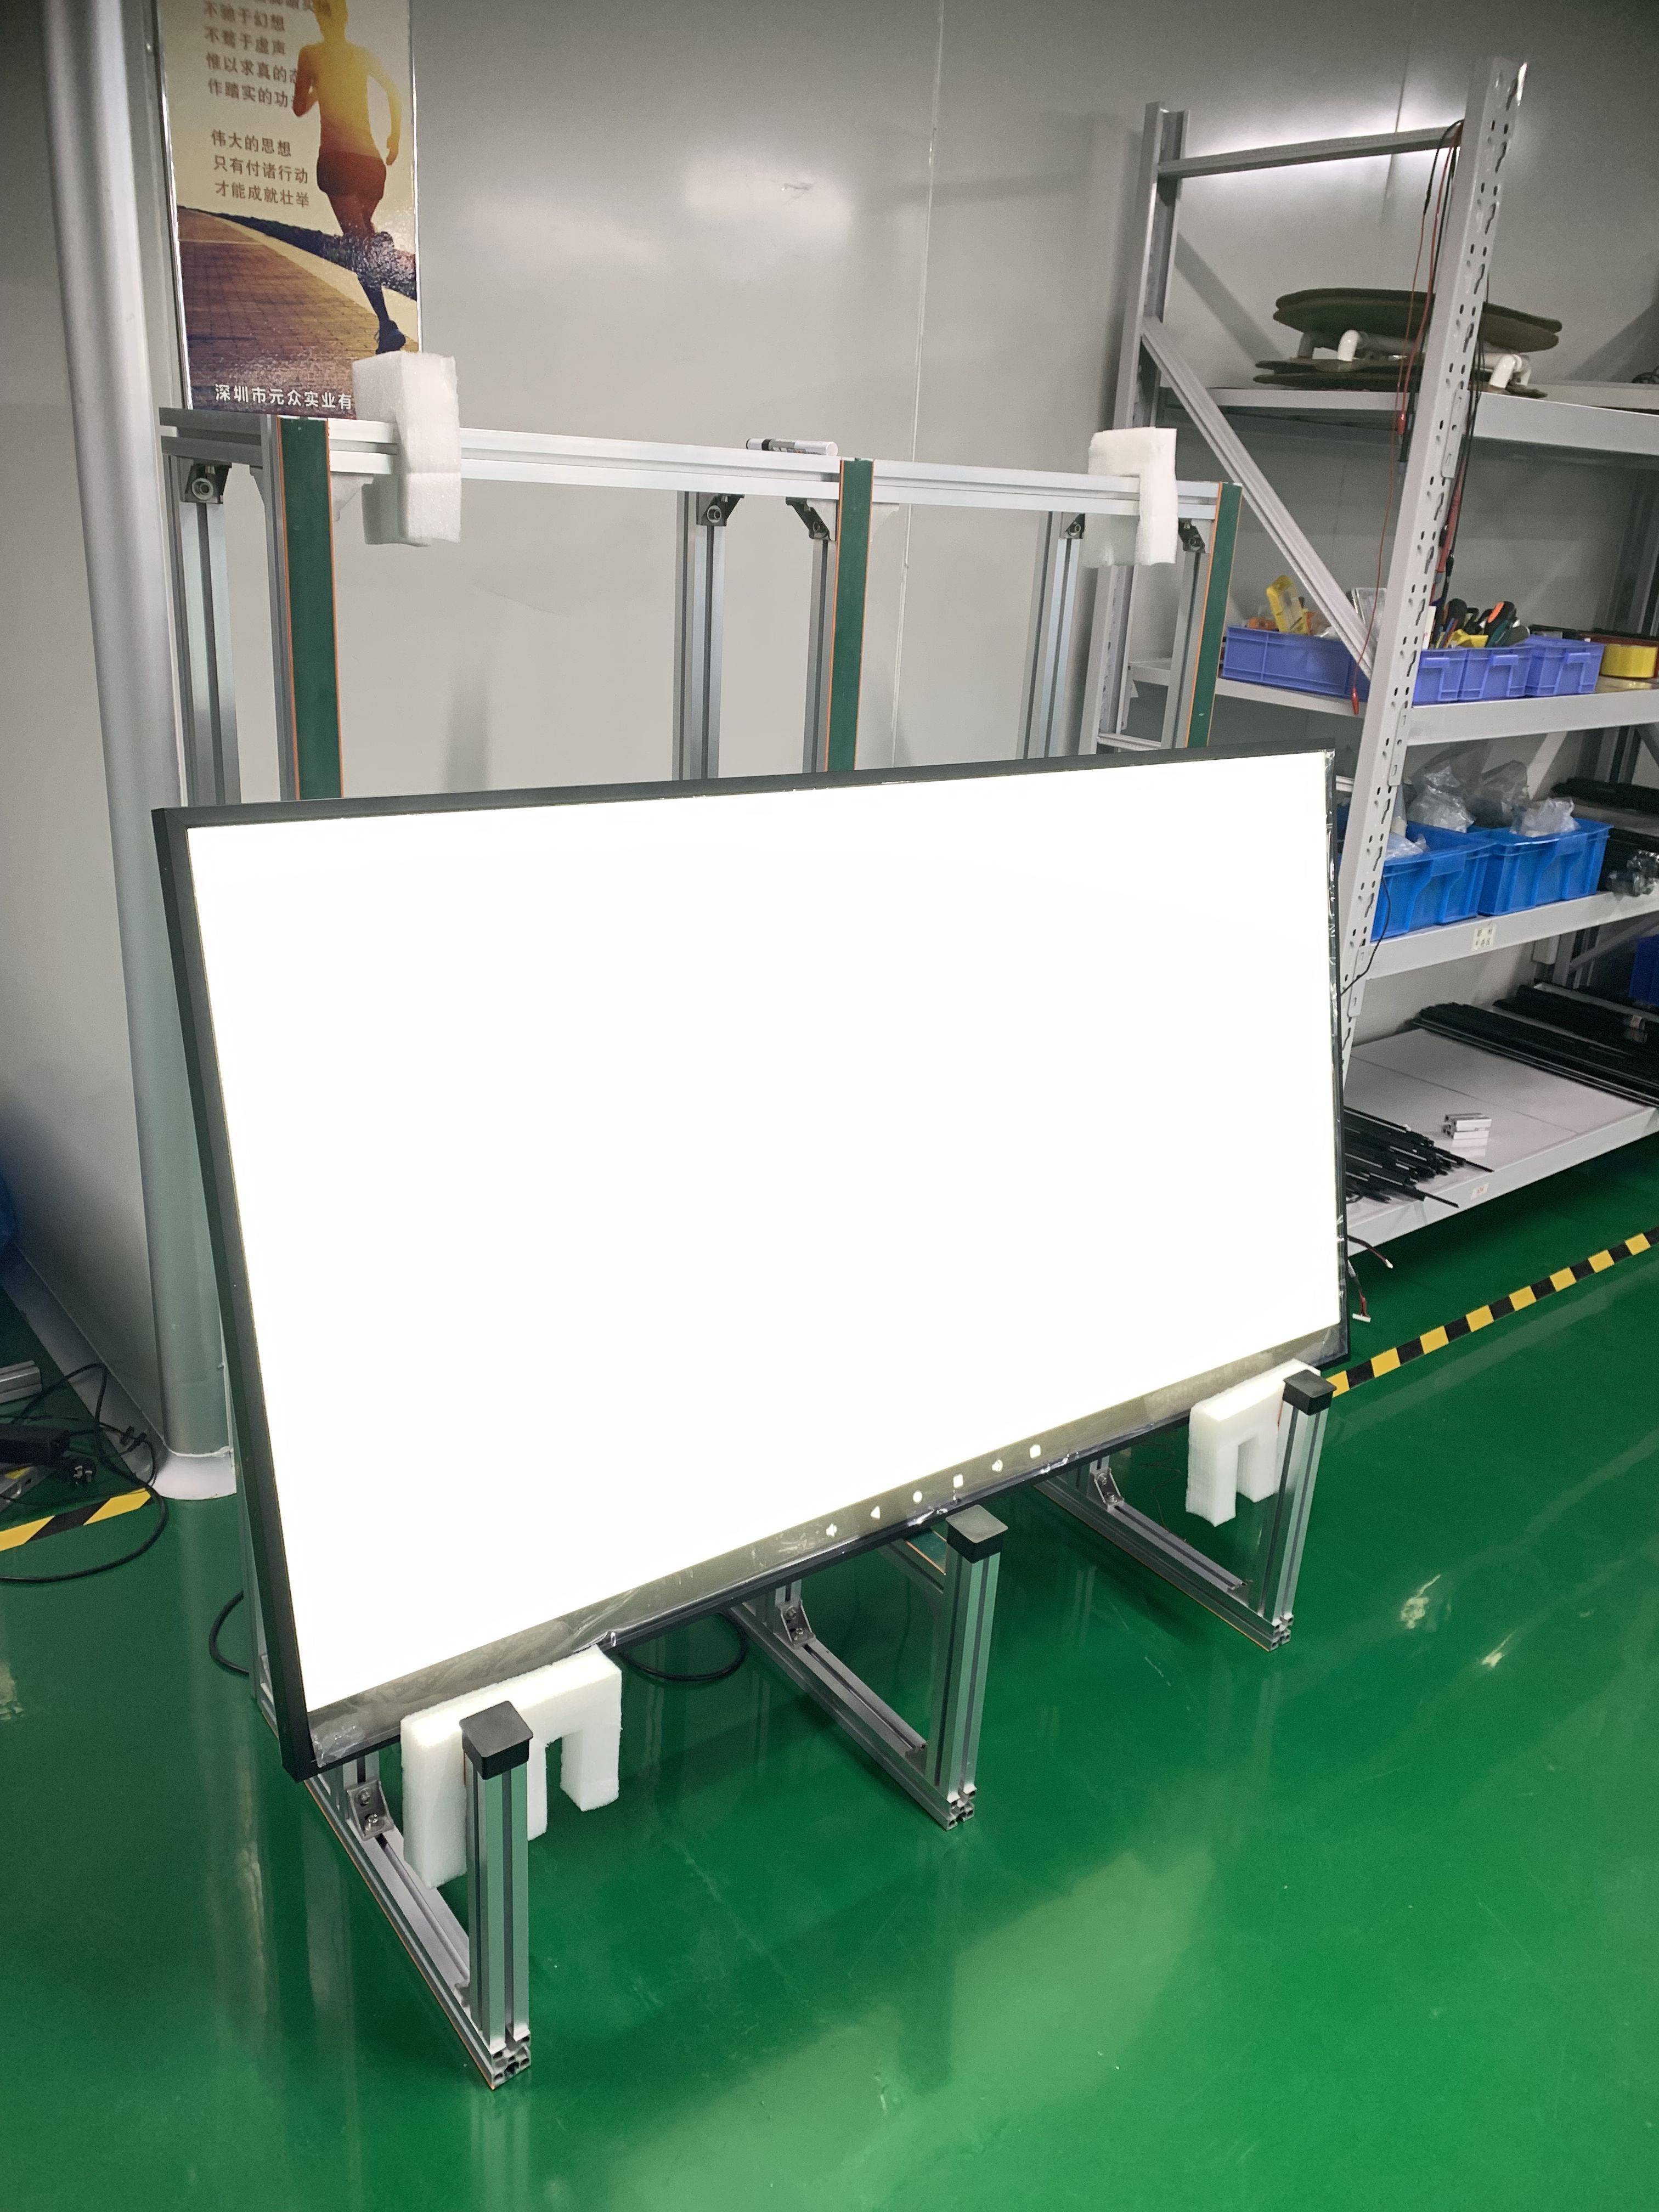 65inch 4k 2500nits High Brightness Sunlight Readable Commercial Advertising Outdoor Lcd Screen Display